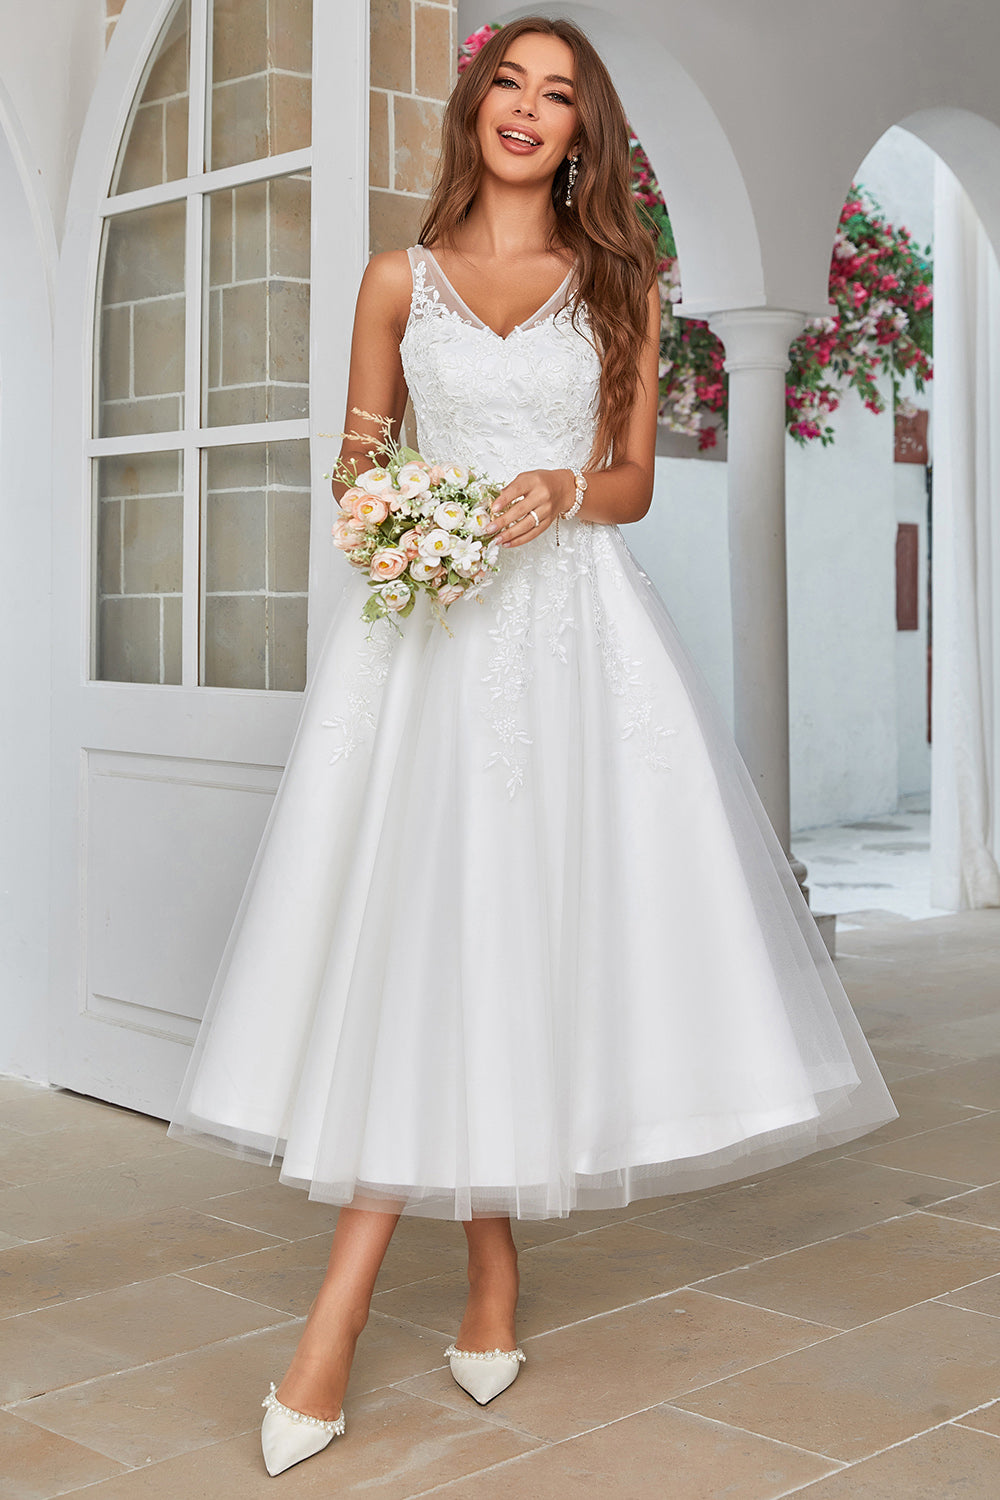 White Mid-Calf Tulle Wedding Dress with Lace